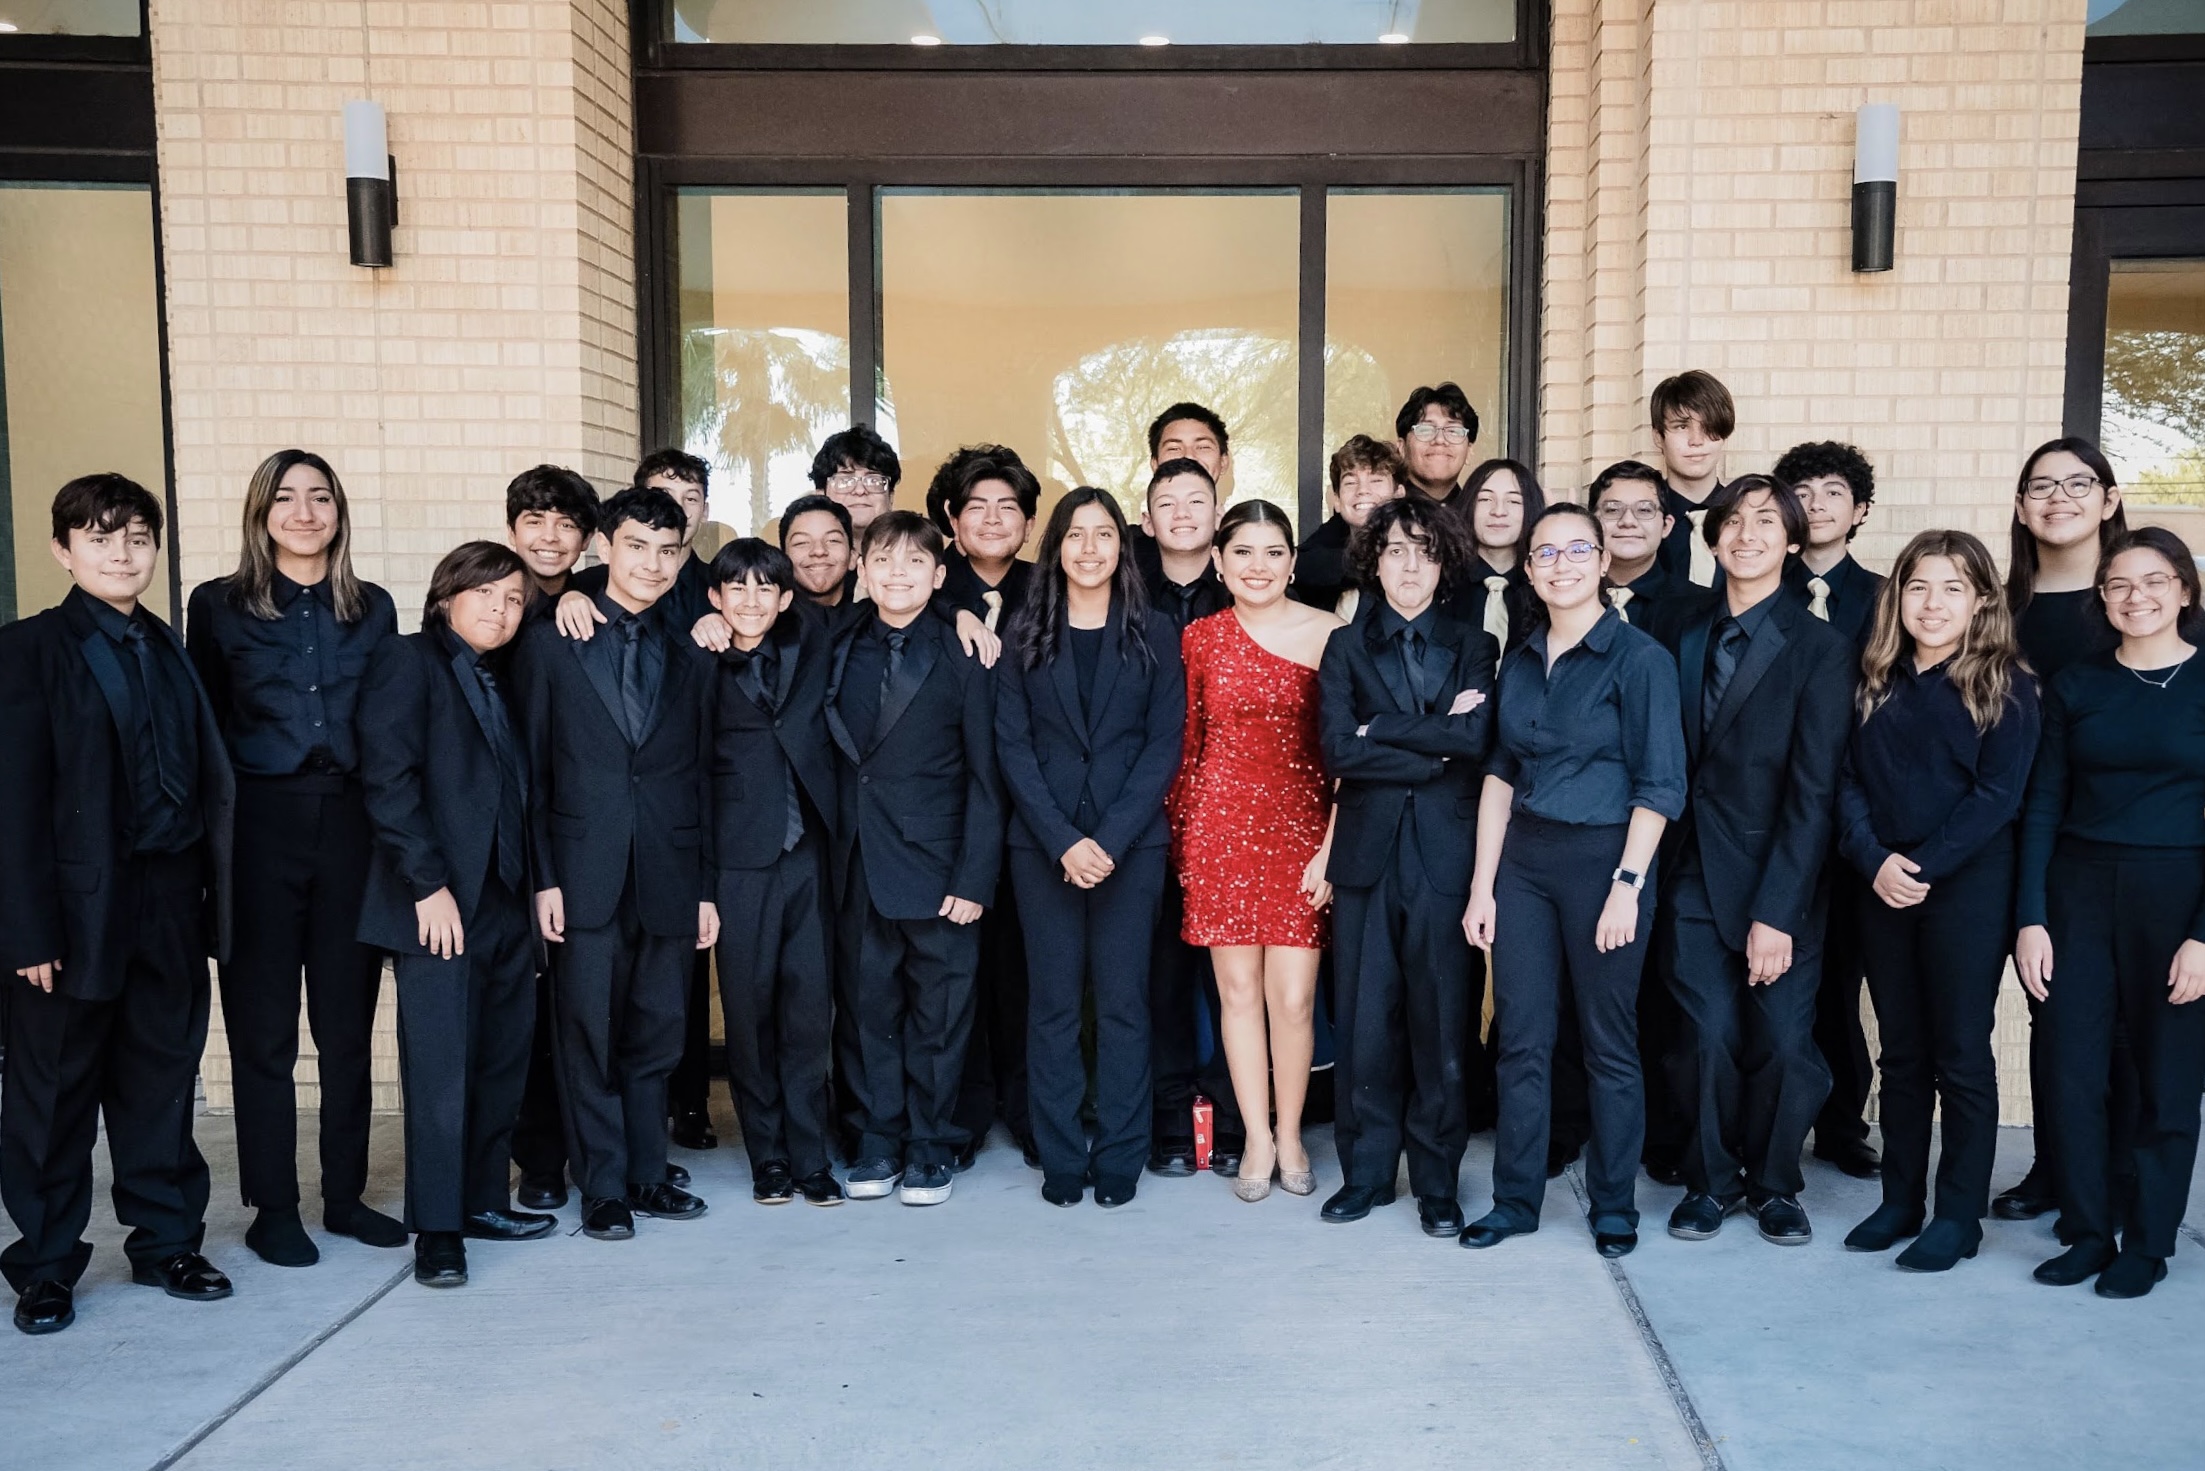 Vela Jazz Band selected as Best in the State